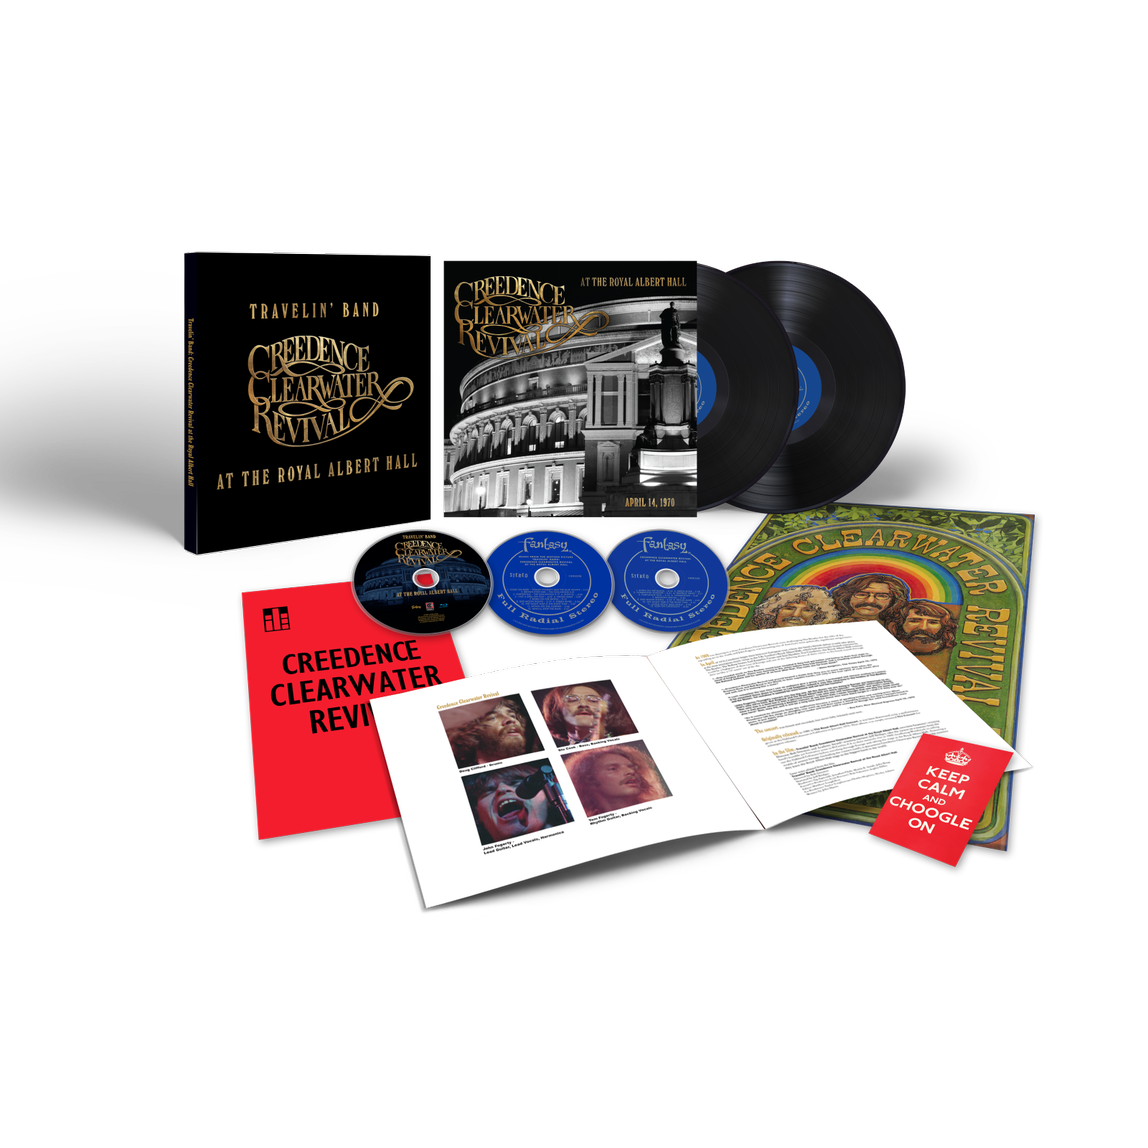 Creedence Clearwater Revival - At The Royal Albert Hall: Super Deluxe Edition Vinyl Box Set